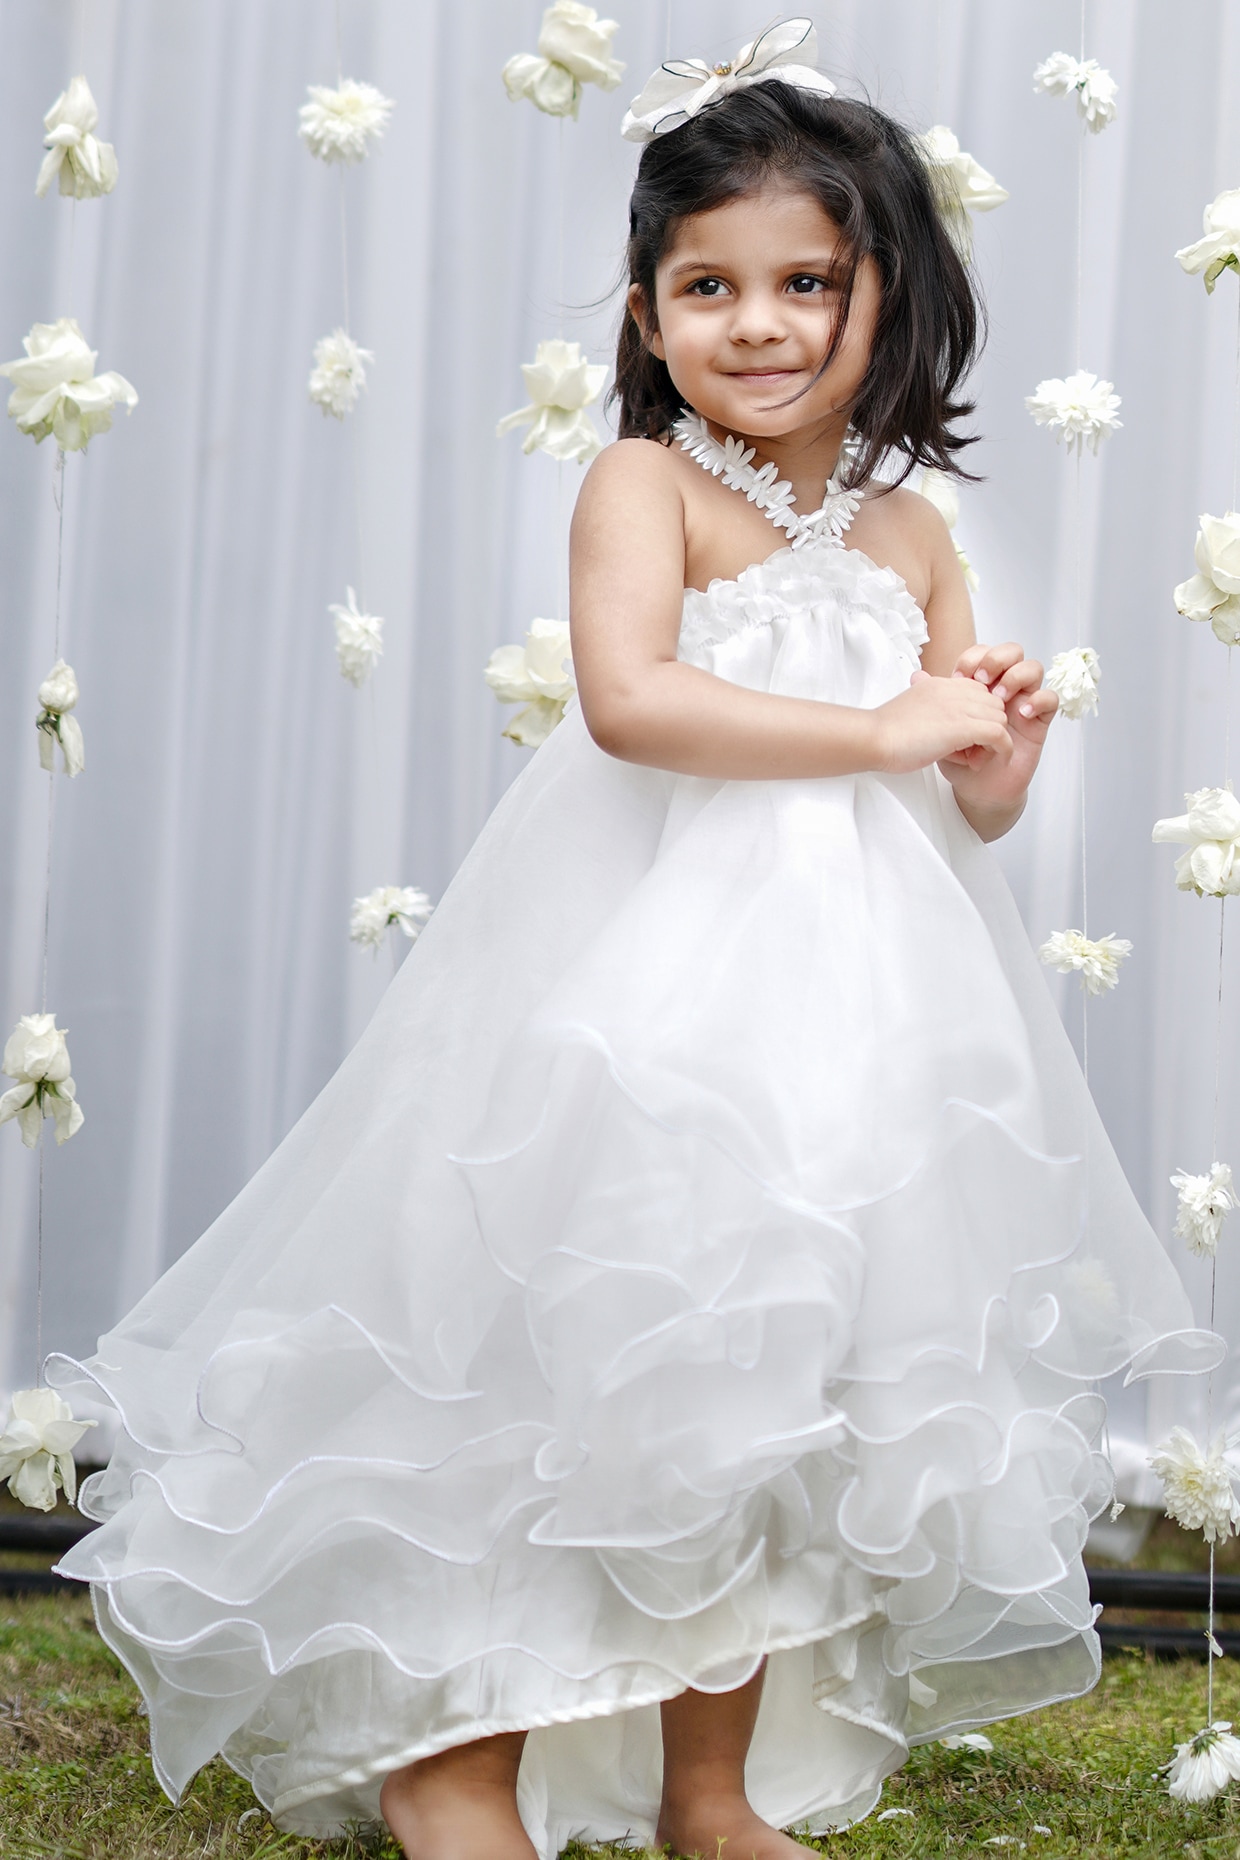 White Tulle Princess Party Cotton Dress For Girls Perfect For Easter,  Holidays, Weddings And Special Occasions Available In Sizes 3 8 Years From  Bai08, $10.11 | DHgate.Com